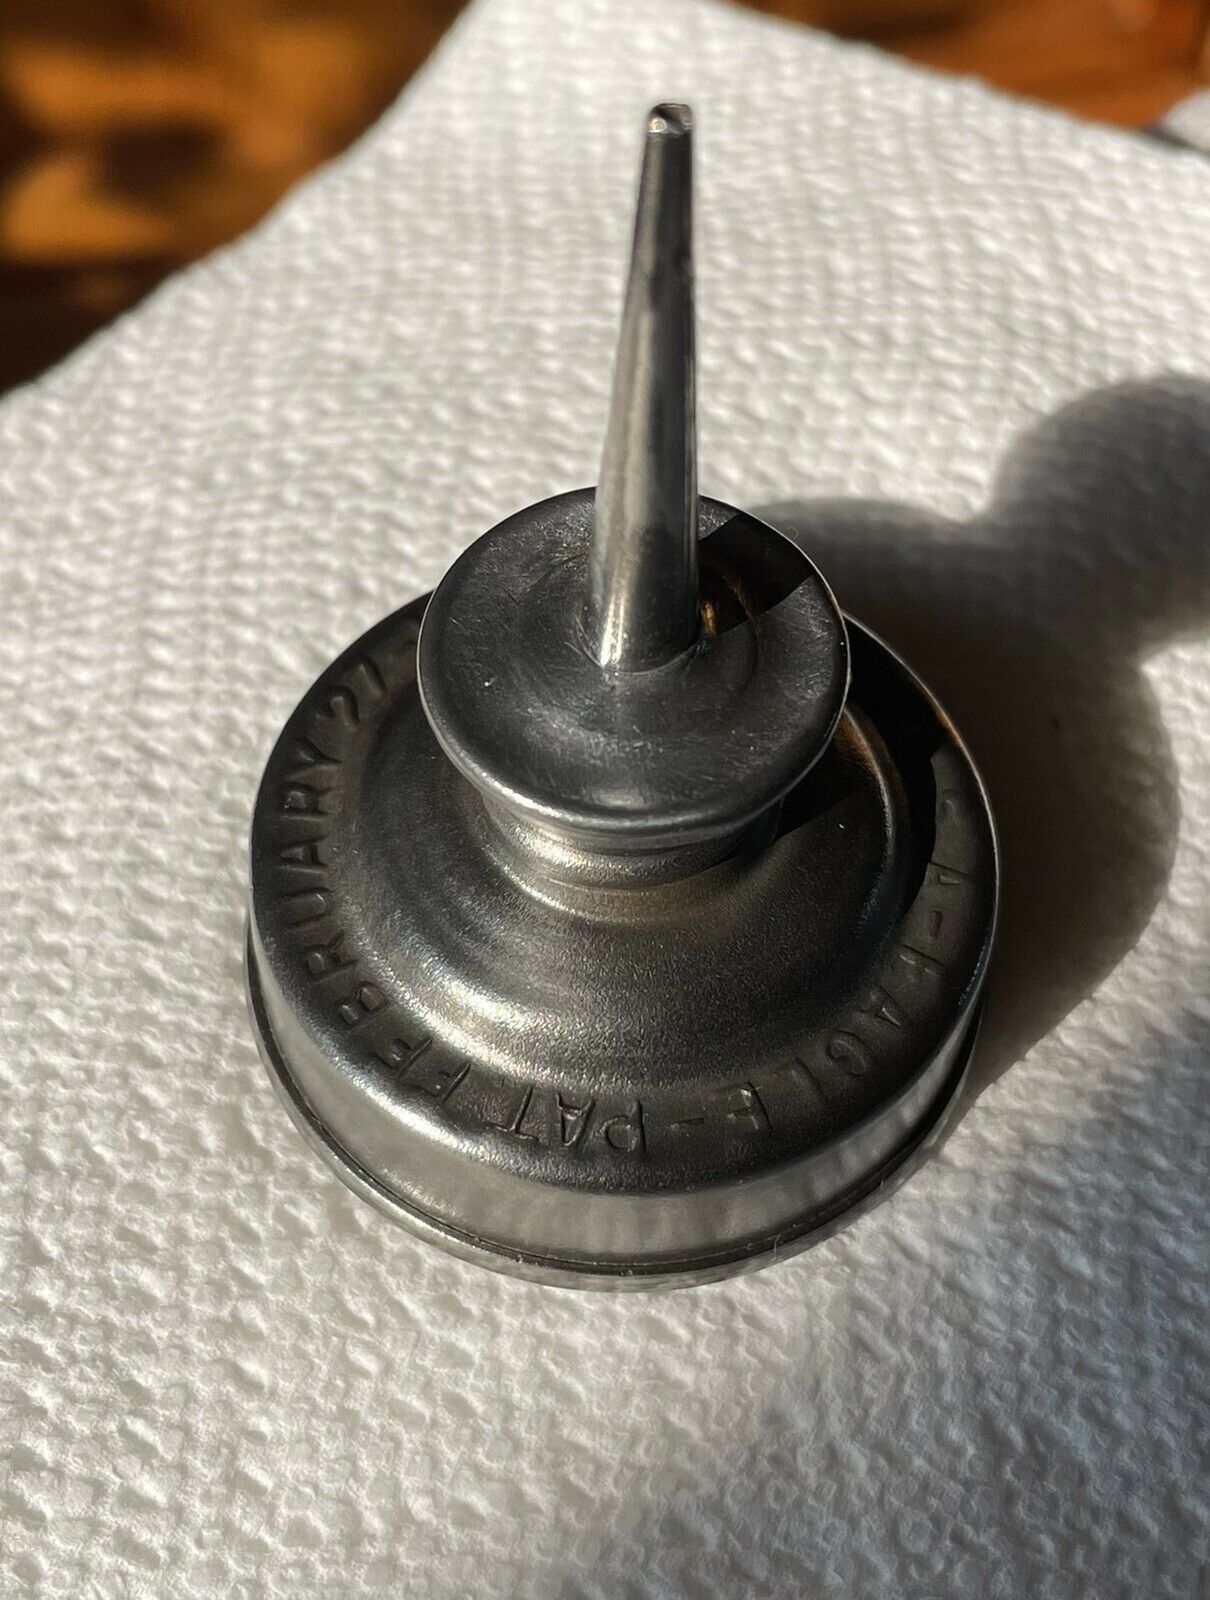 Antique Eagle Thumb Press Oiler Oil Can Patent February 27 1923 L@@k Very Clean